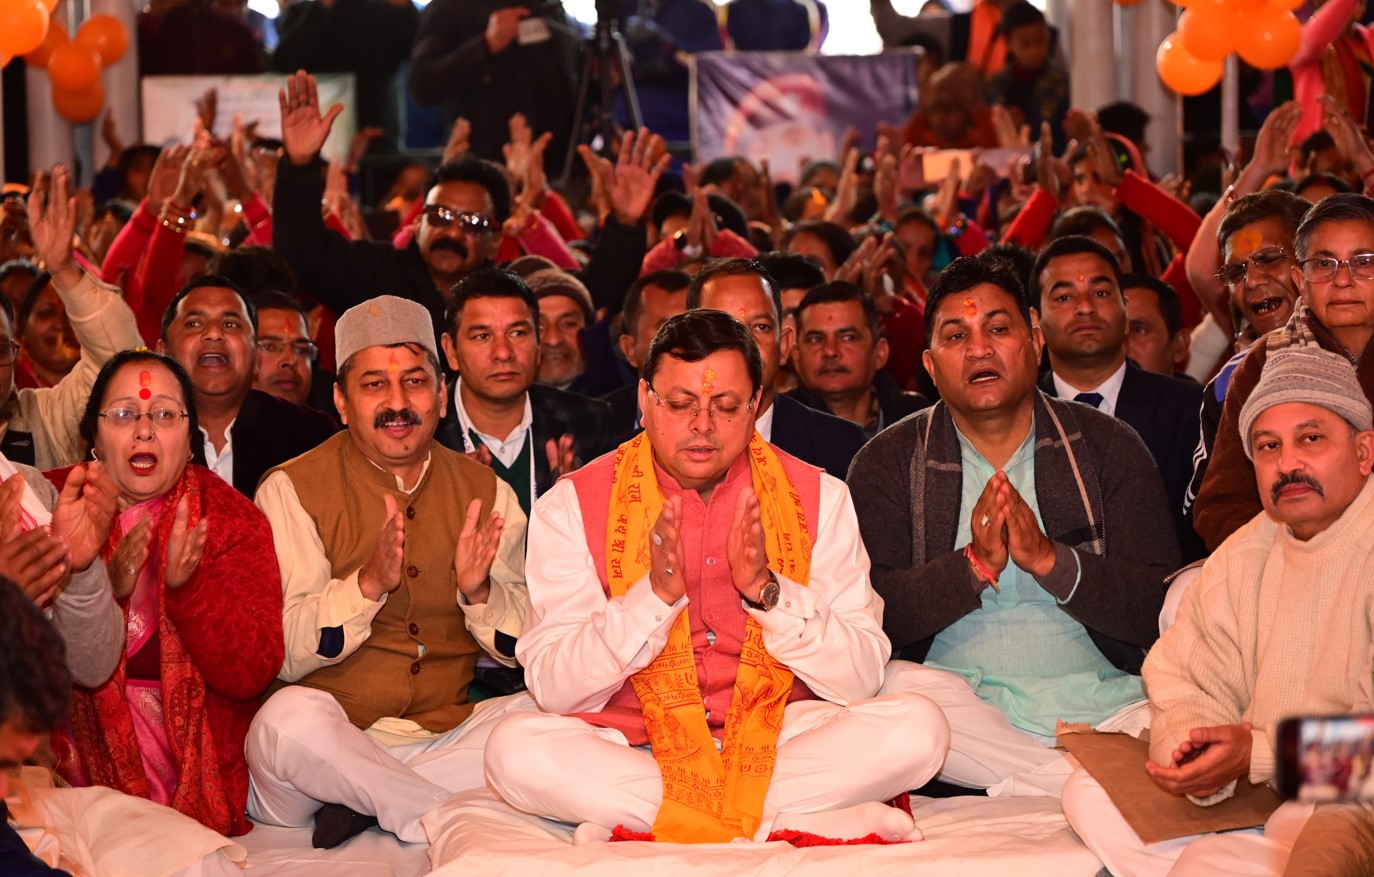 “Cultural festival” started in the state from Kainchi Dham Nainital on the occasion of Uttarayani festival.